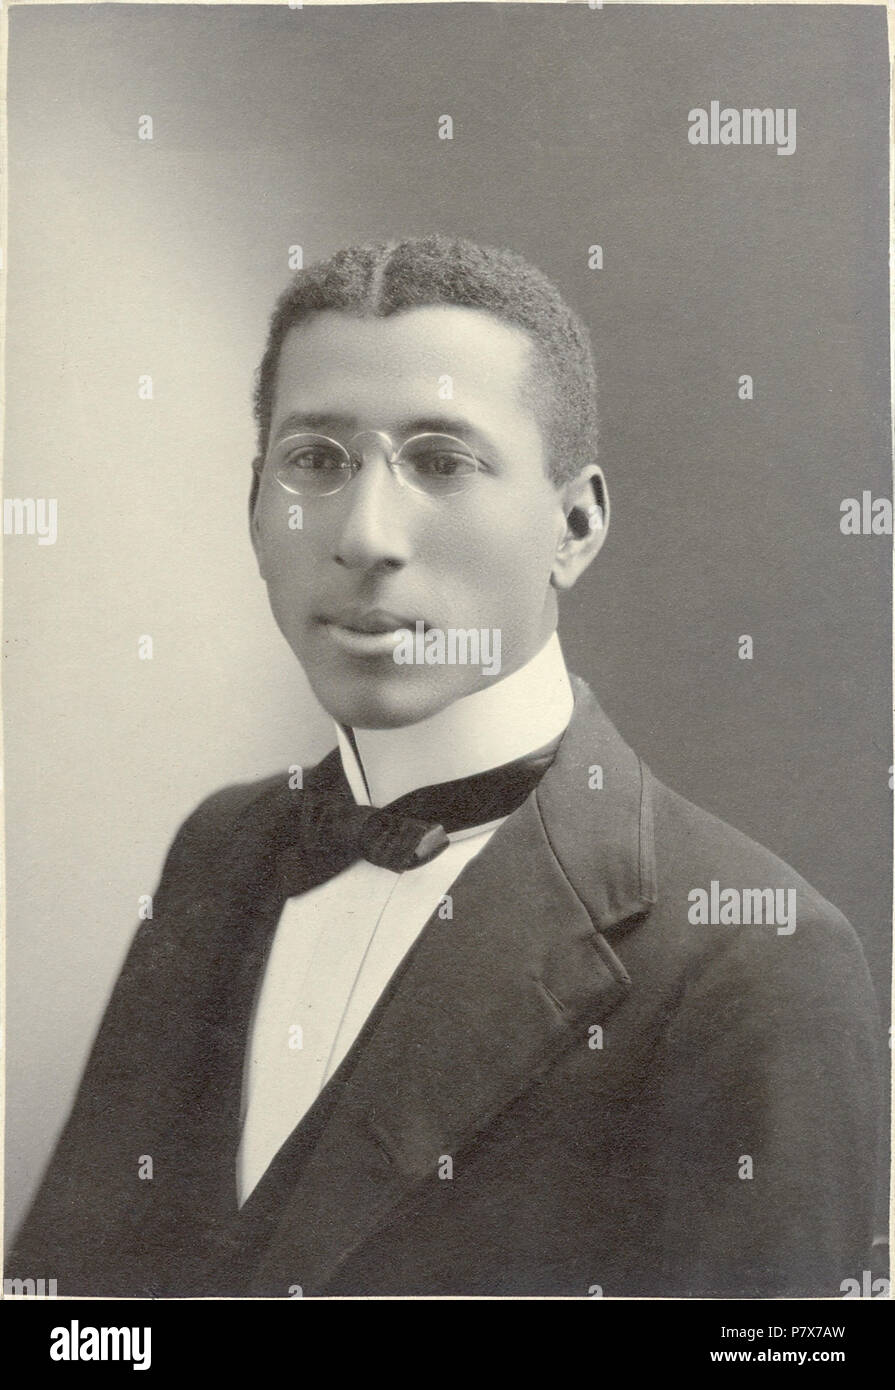 English: George Williamson Crawford, a student at Yale University Law School at the time of this photograph. circa 1900 171 George Williamson Crawford edit Stock Photo